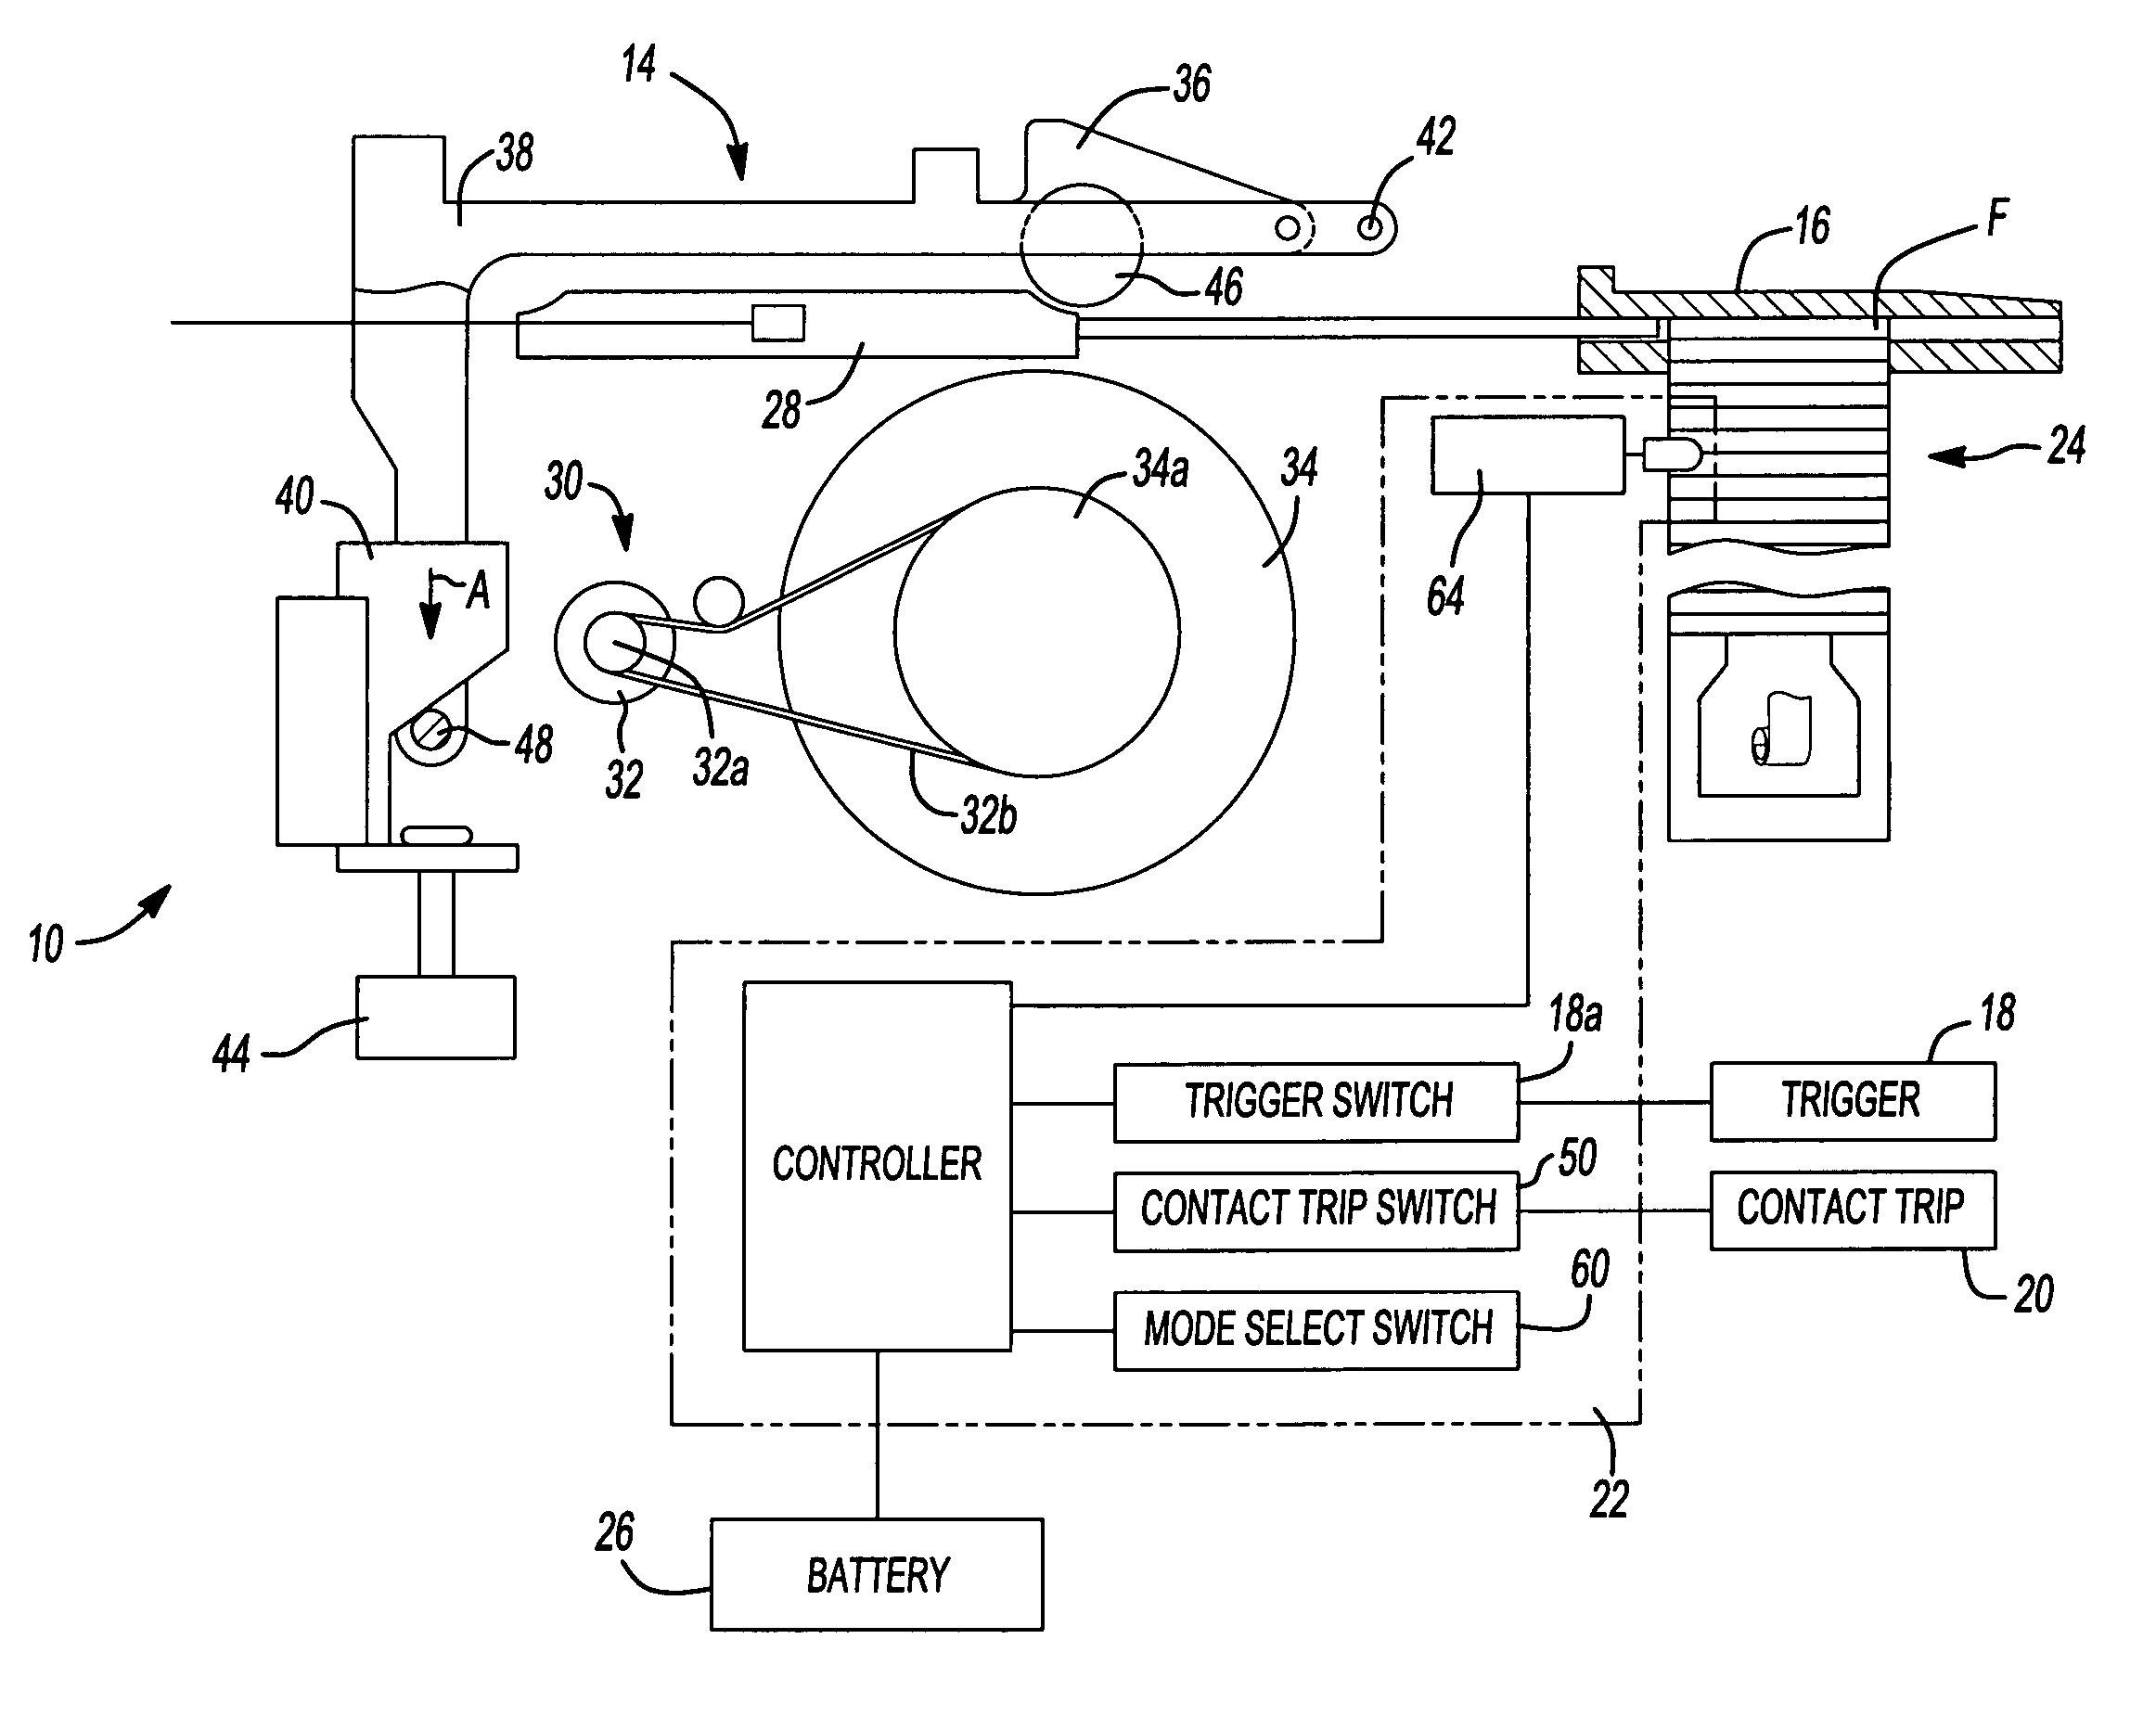 Method for controlling a power driver